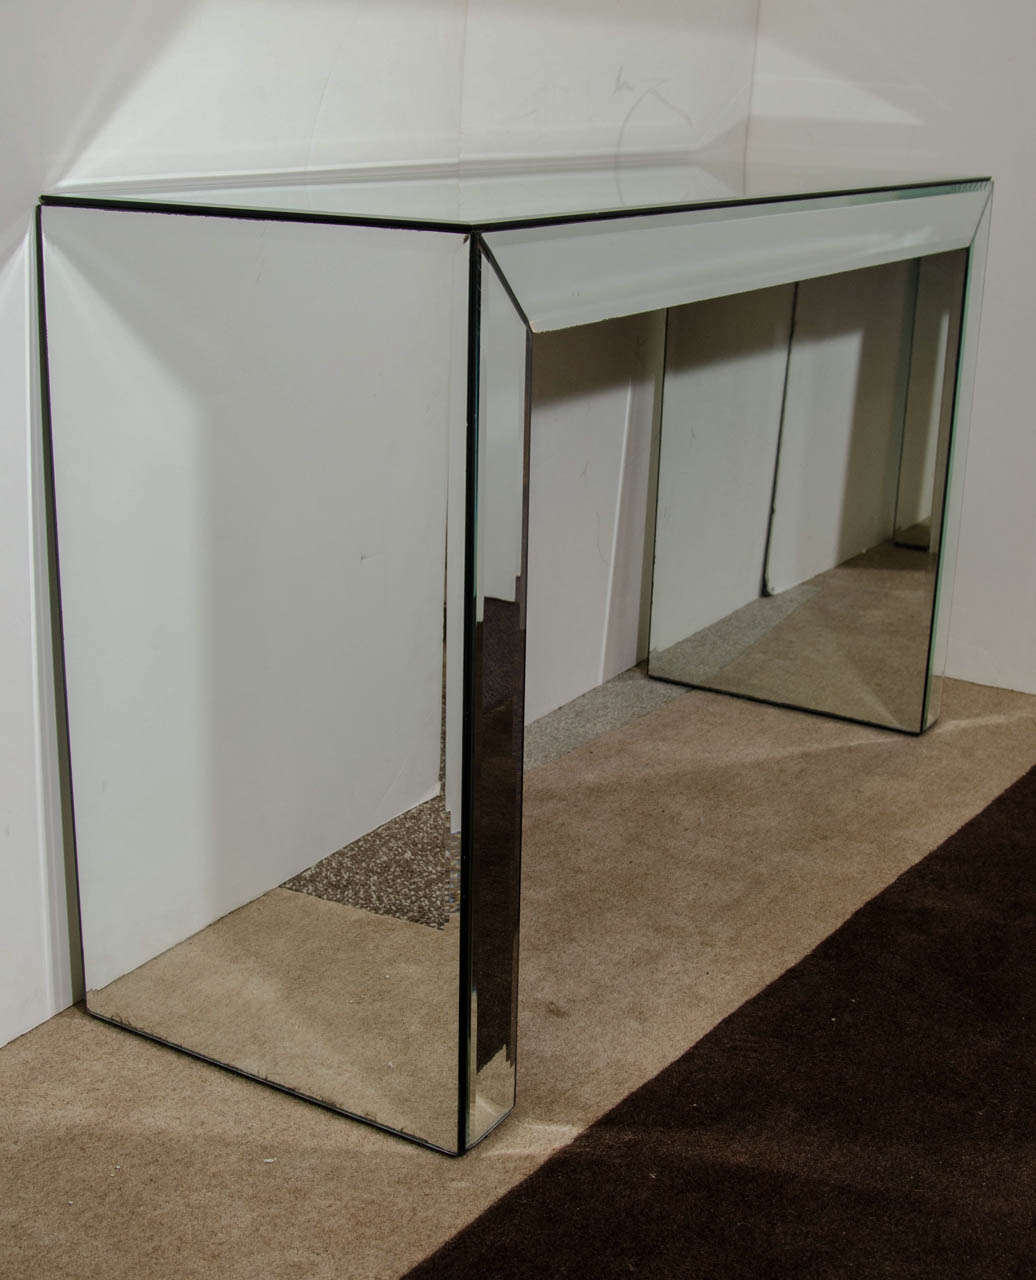 A vintage console table, desk or vanity with mirrored surfaces. The piece is finished on all sides. Good vintage condition with age appropriate wear; the piece has a longer scratch on the surface as well as scratches throughout which are